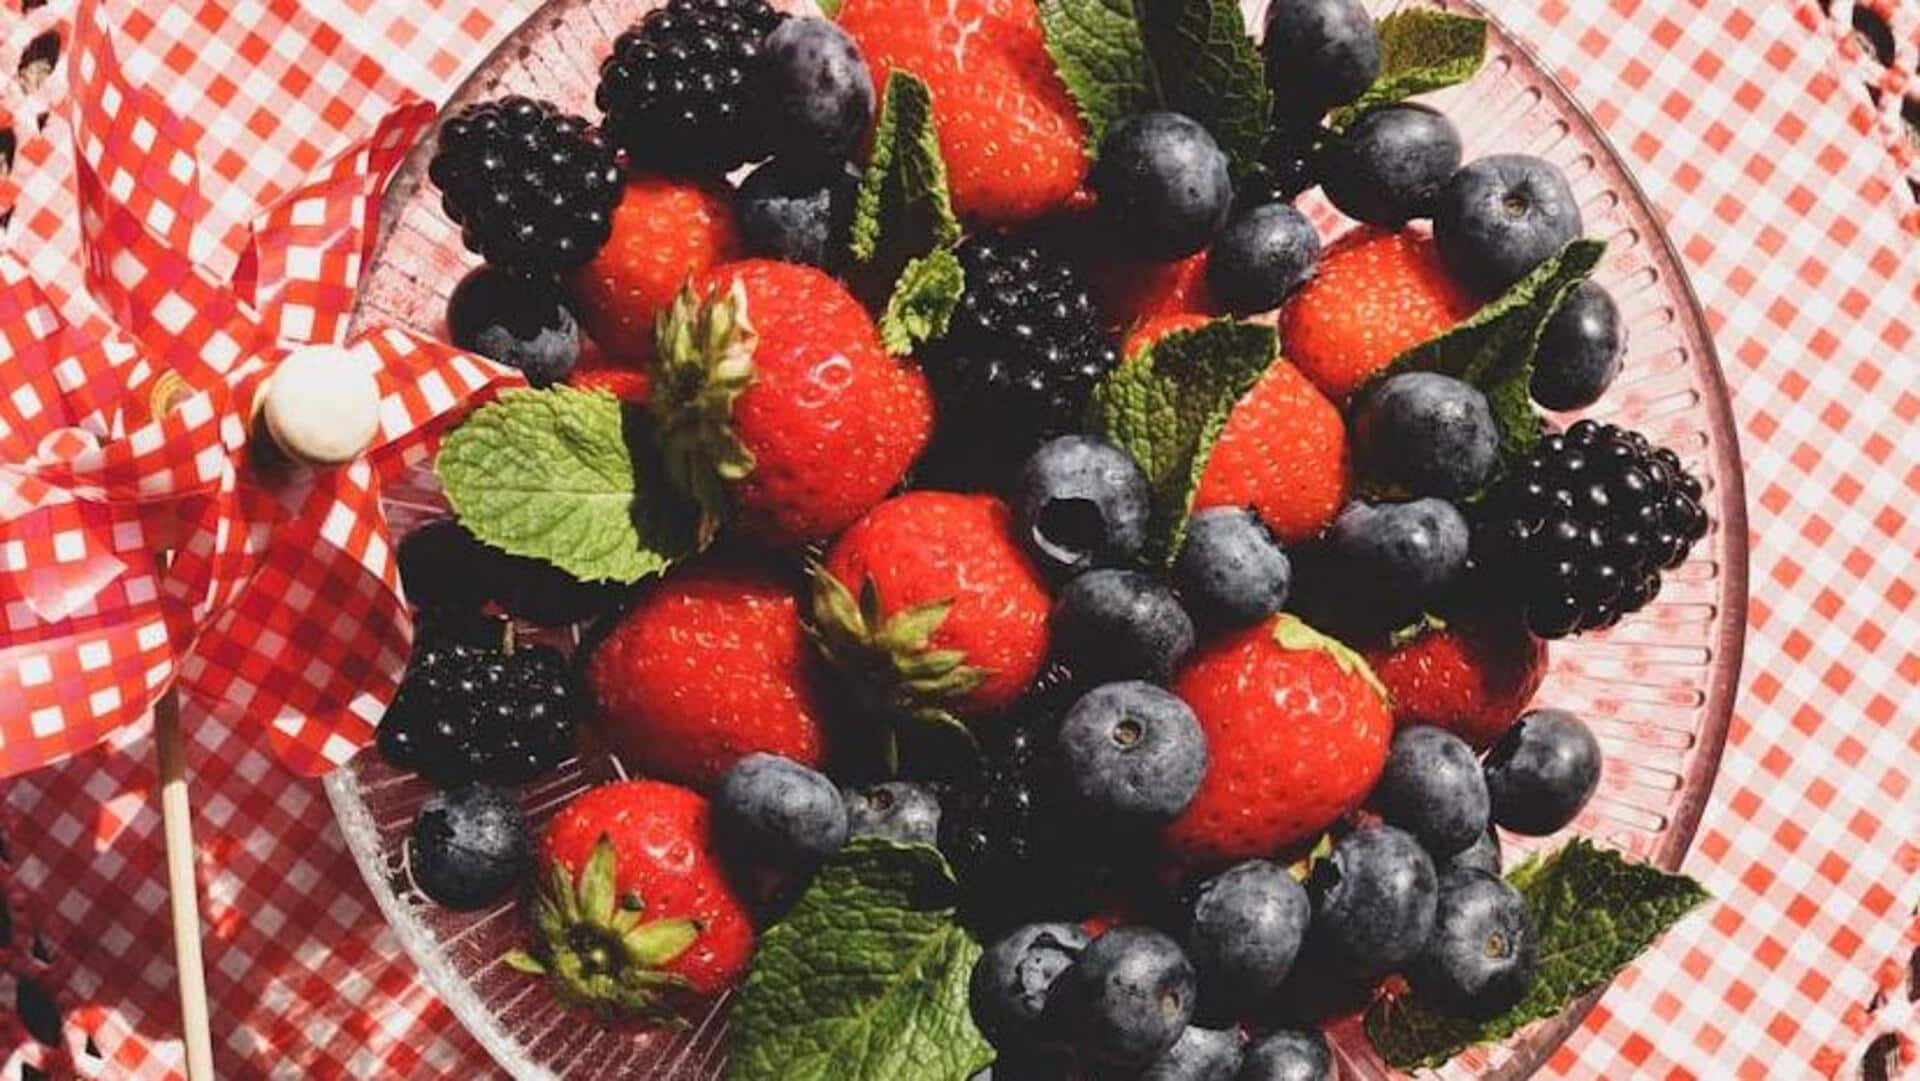 Boost your immunity with berries